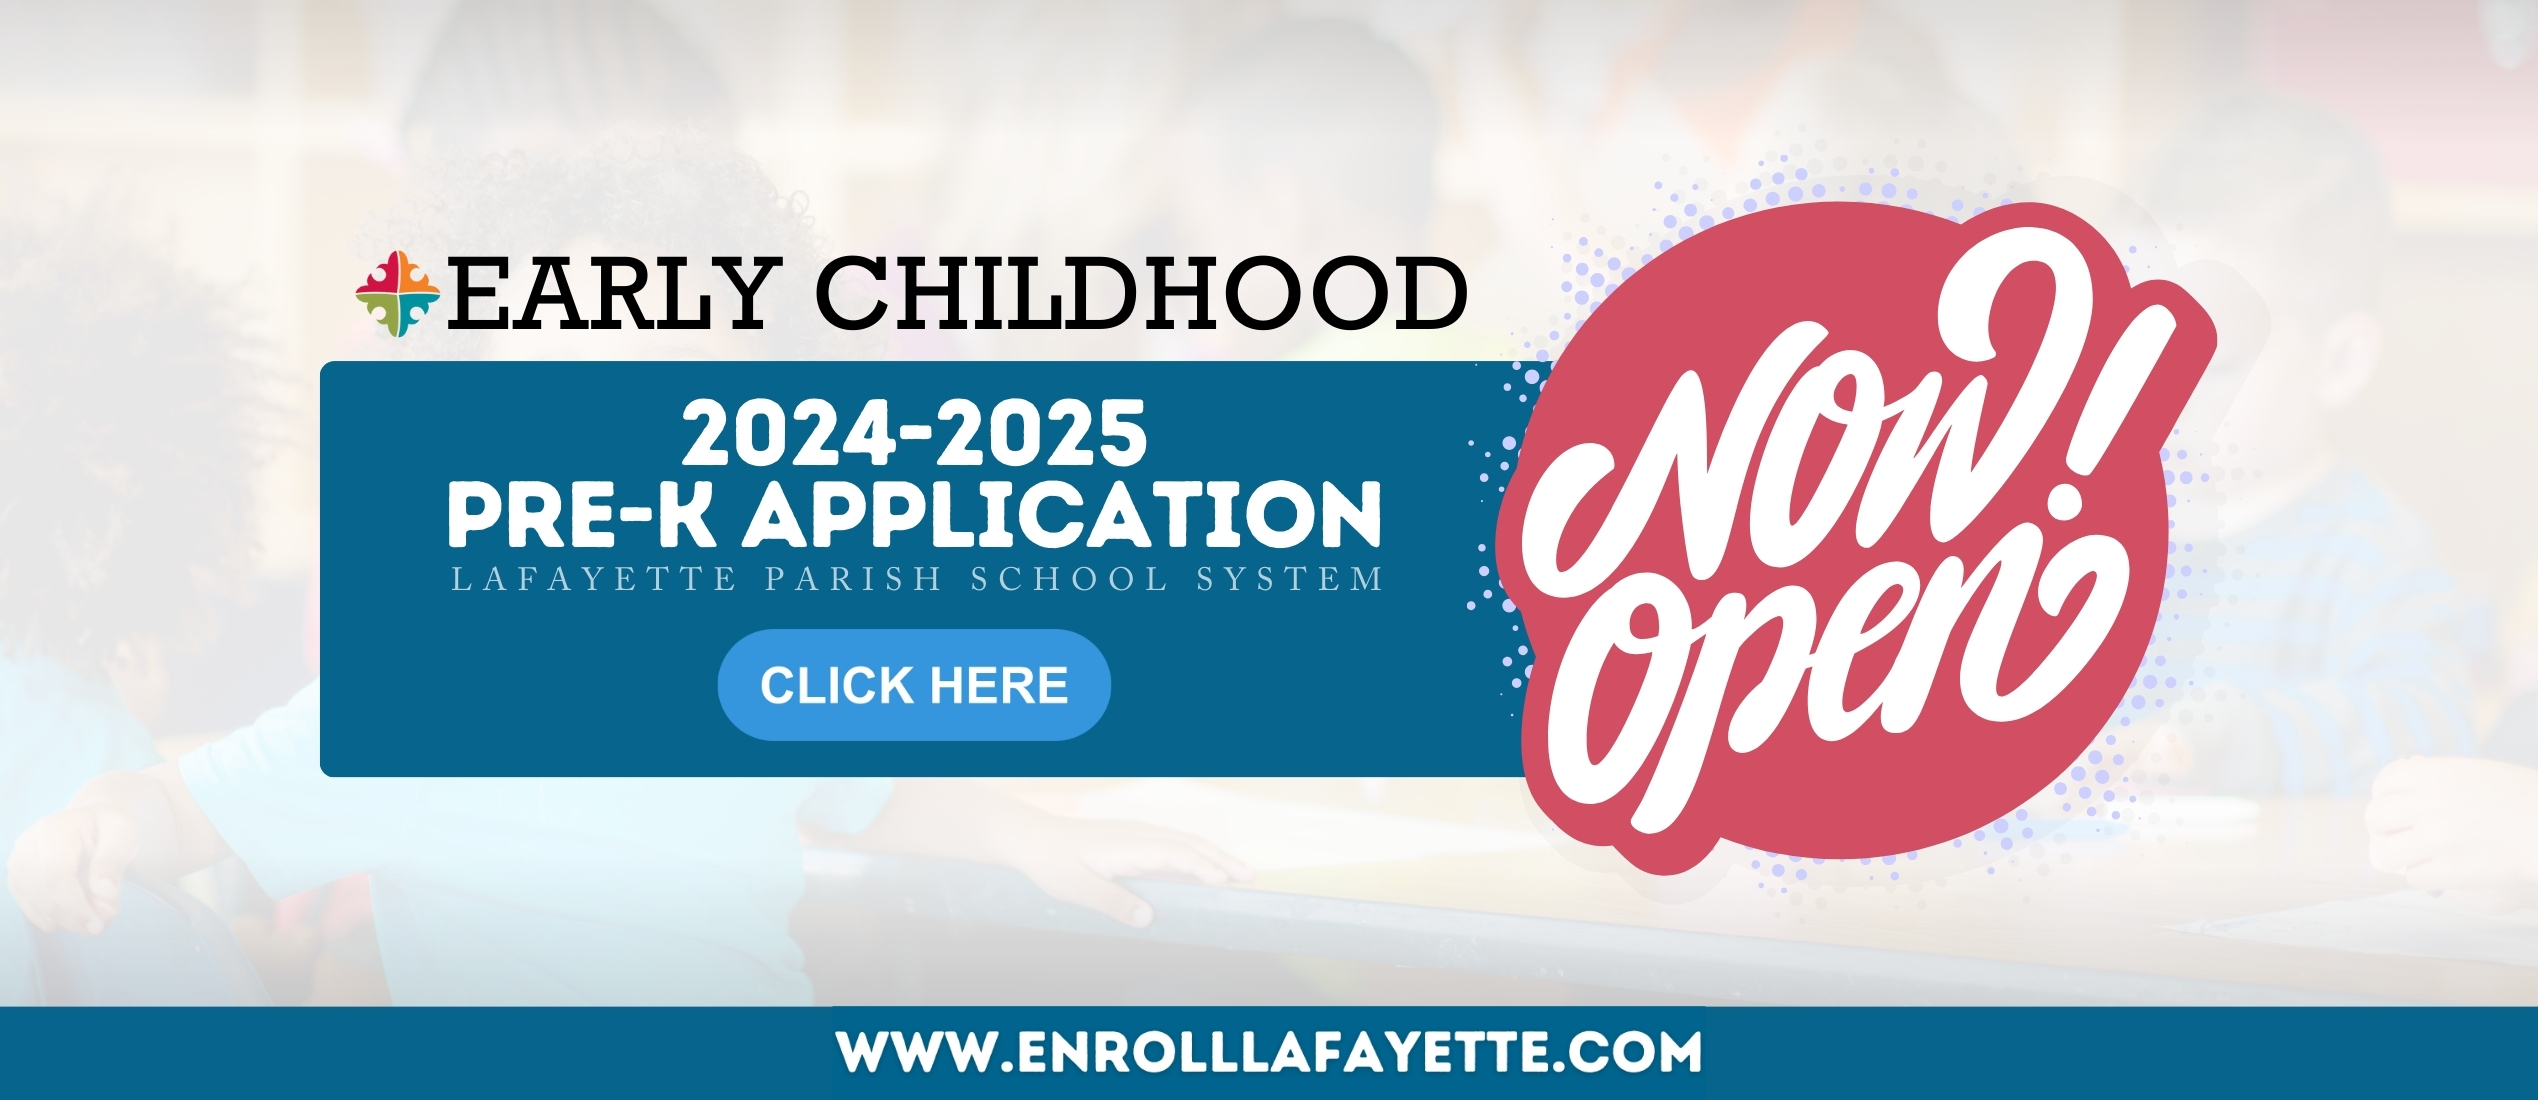 Early Childhood Applications Now Open